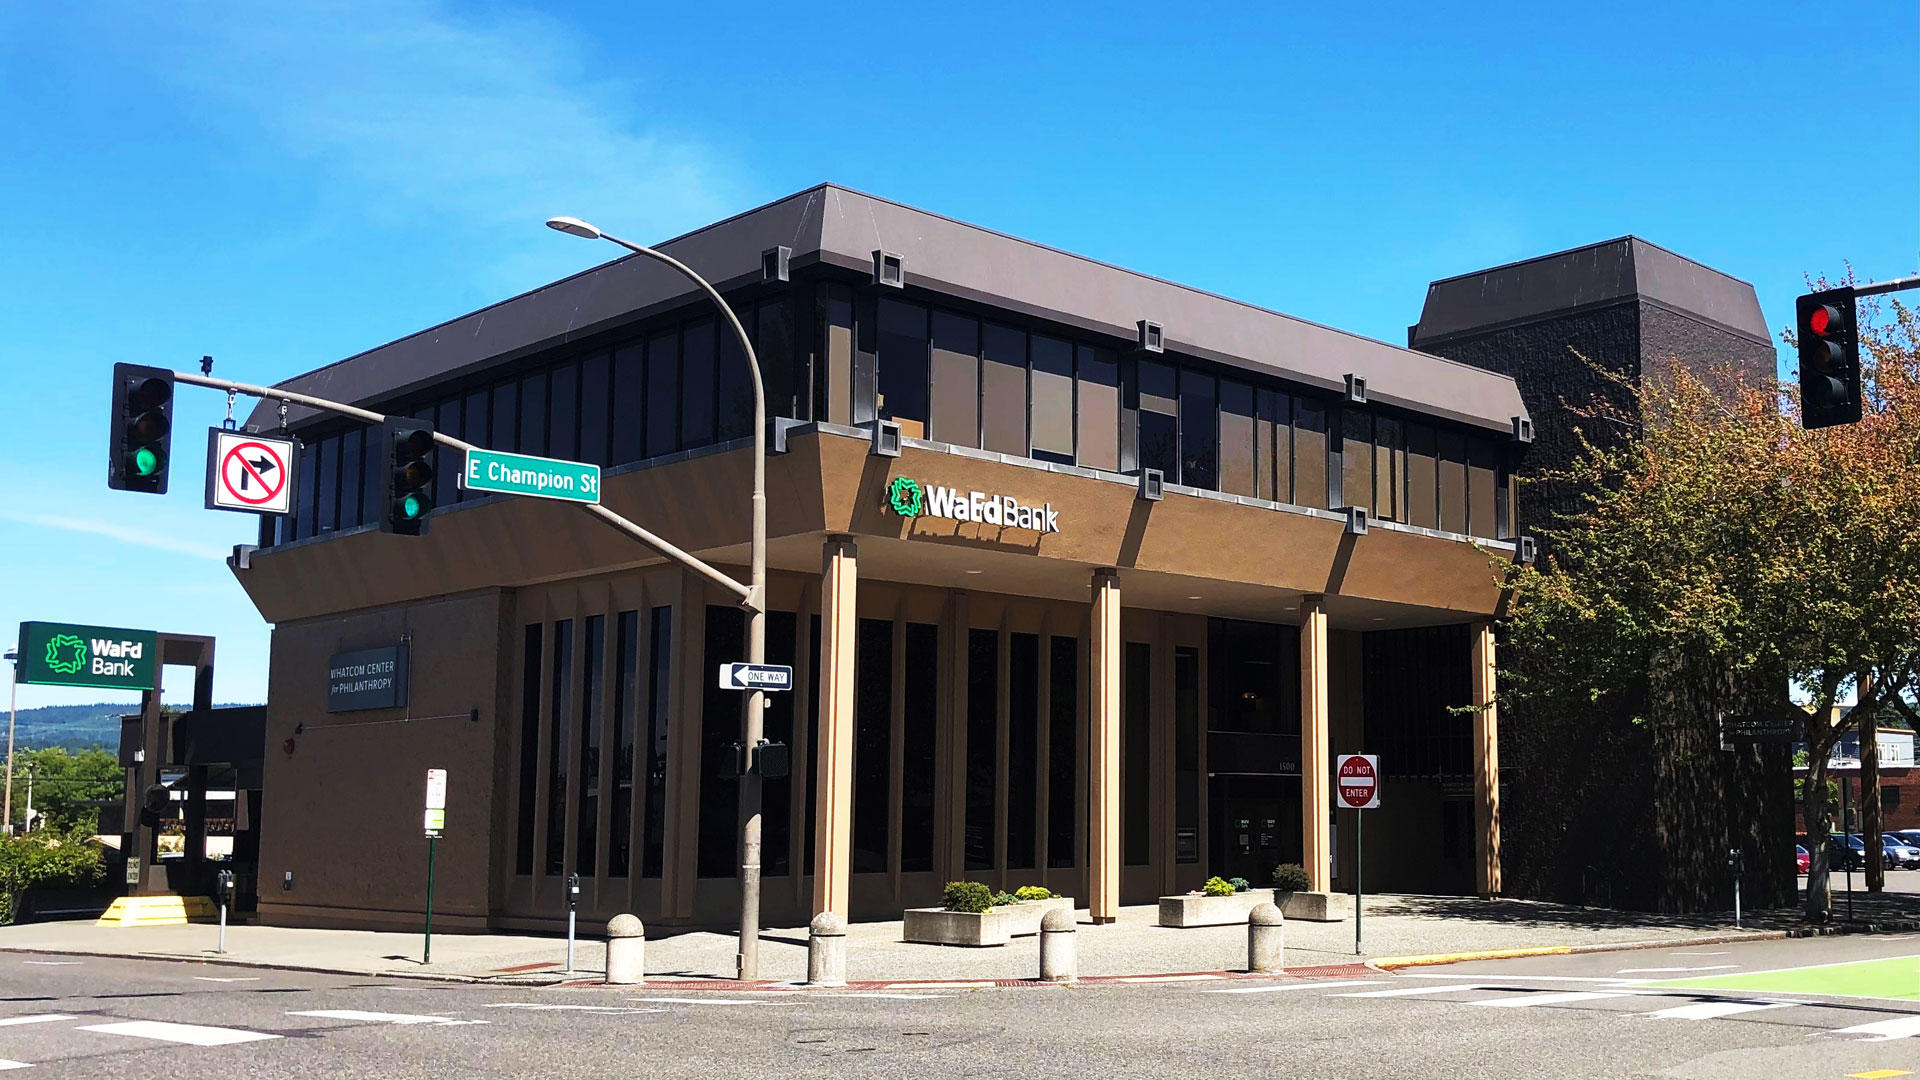 Photo of the WaFd Bank Branch location in Bellingham, Washington. Located at 1500 Cornwall Ave, Bell WaFd Bank Bellingham (360)733-3050